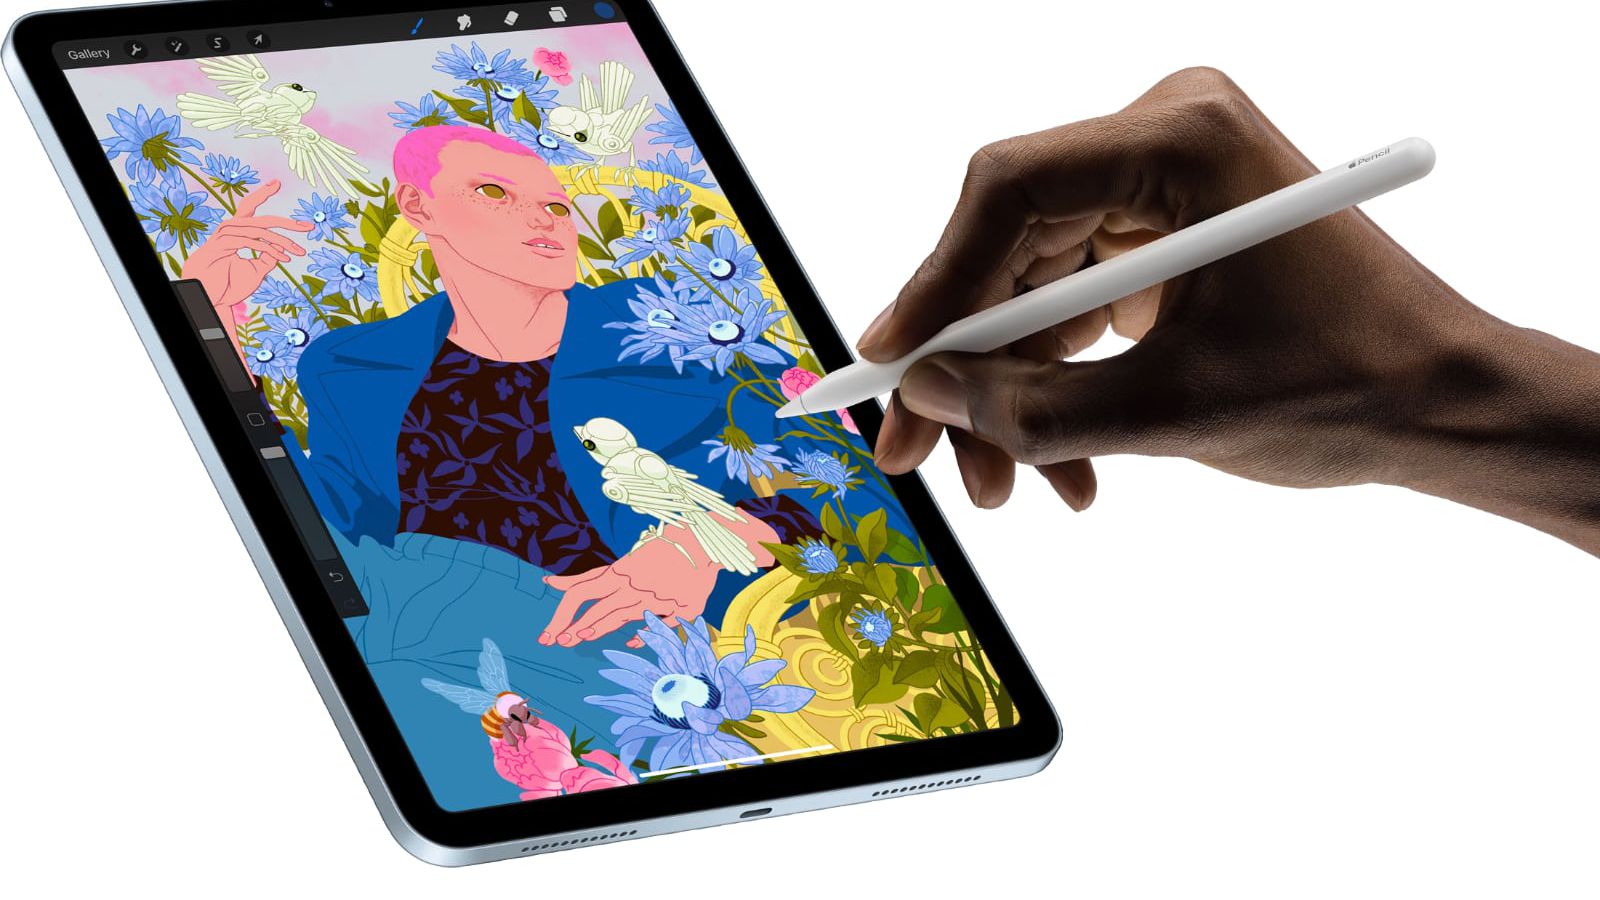 Deals: Apple Pencil 2 on Sale for $99 at Amazon Off, Lowest Price) - MacRumors